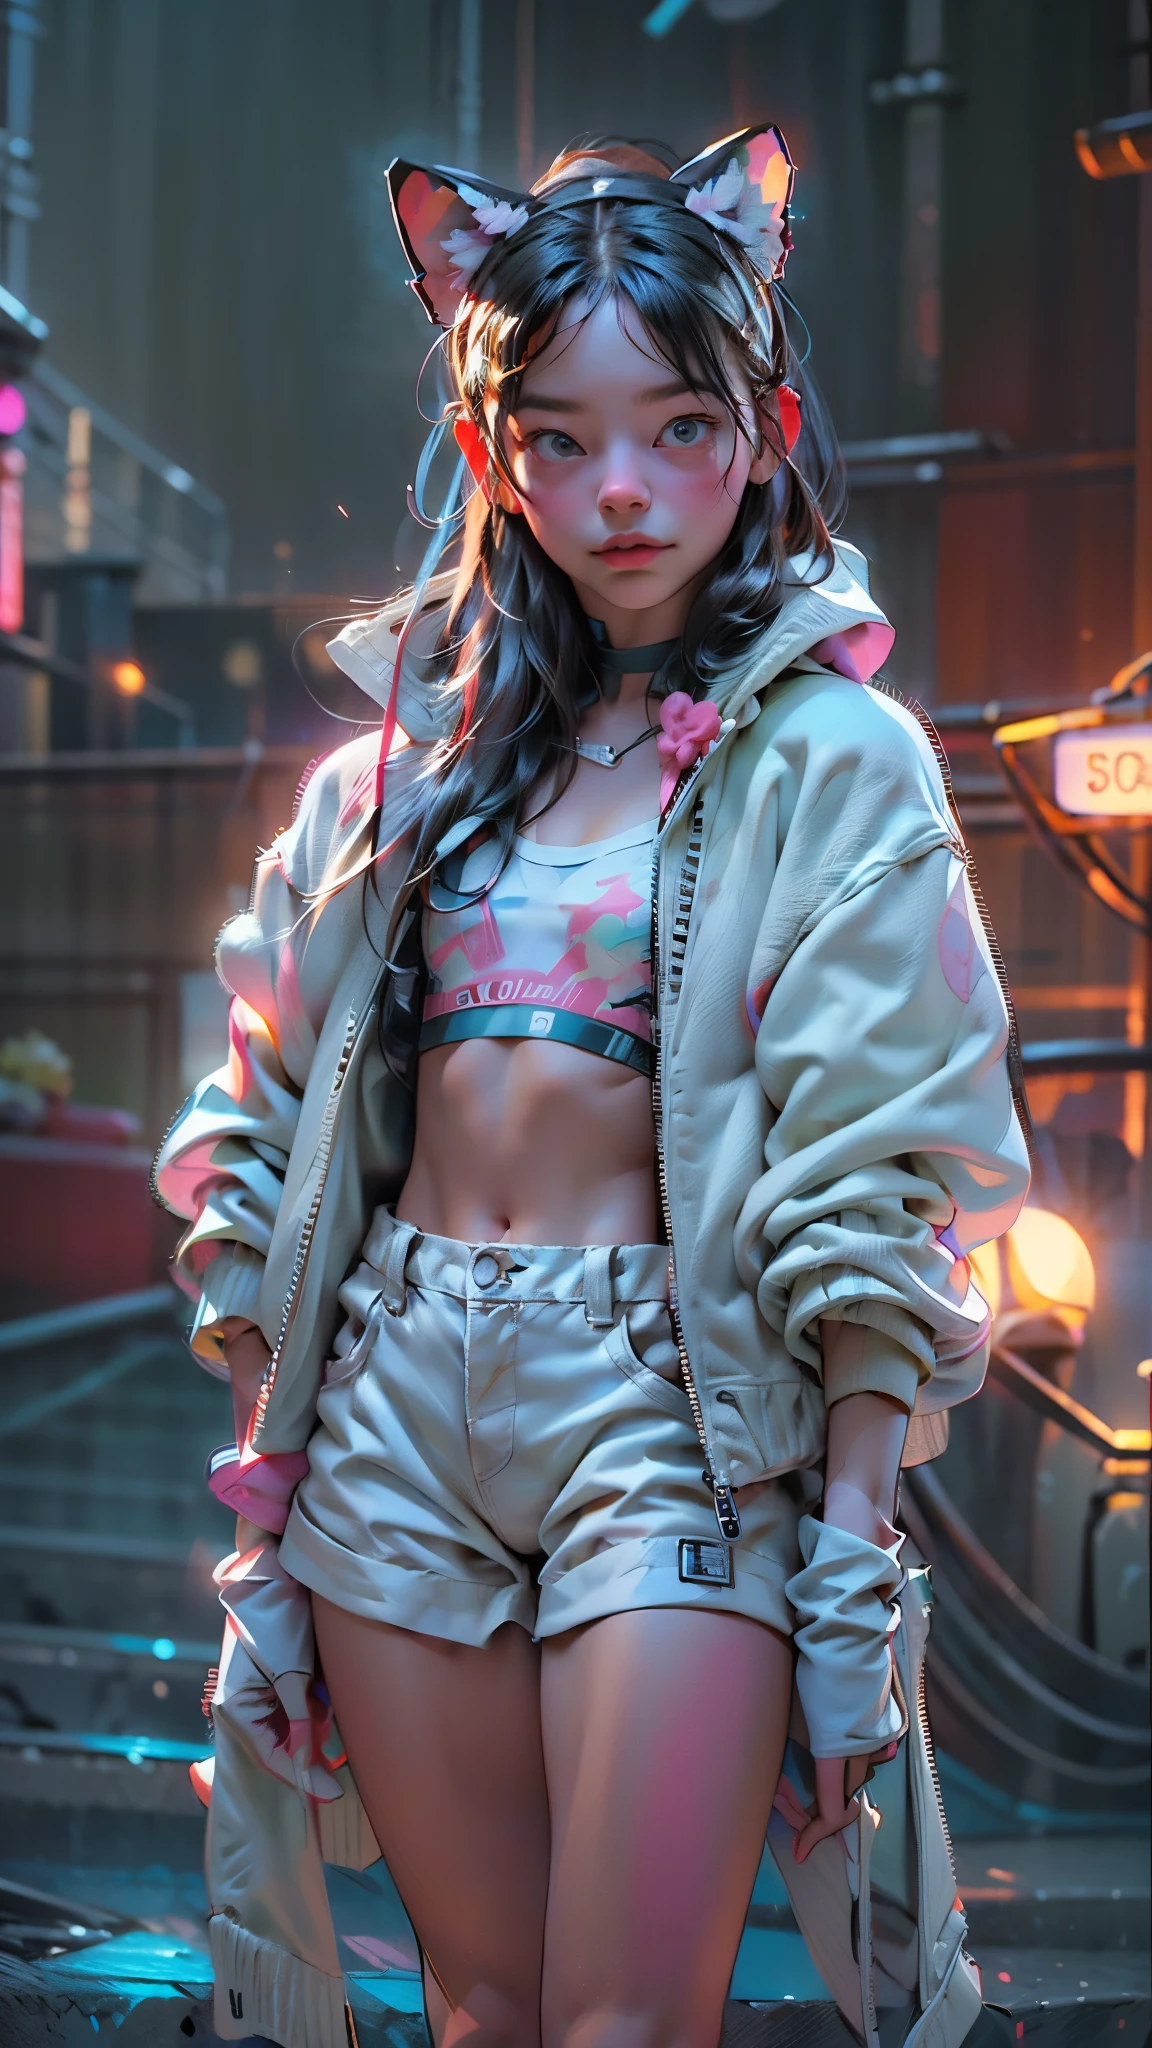 (La Best Quality, High Definition), (ultra detail), (1Baby Mkella), (1 beautiful girl), (white underwear, with medium straight hair, streetwear, wearing white pleated miniskirt and ears, blue hoodie , on a naked body).(on the chest it says &#39;Future funk&#39). (among a bright futuristic cityscape illuminated by neon lights). (More 8K.motor surreal:1.4,HD,La Best Quality:1.4, photorealistic:1.4, skin texture:1.4, Masterpiece:1.8,Masterpiece, Best Quality,object object).(detailed facial features:1.3) ,(The correct proportions),(Beautiful blue eyes:1.4), (cowboy pose), (more details:1.4), ,(cyberpunk 2.1), (kawaii style: 1.4); , (ice element:1.4),(white underwear:V2.1)